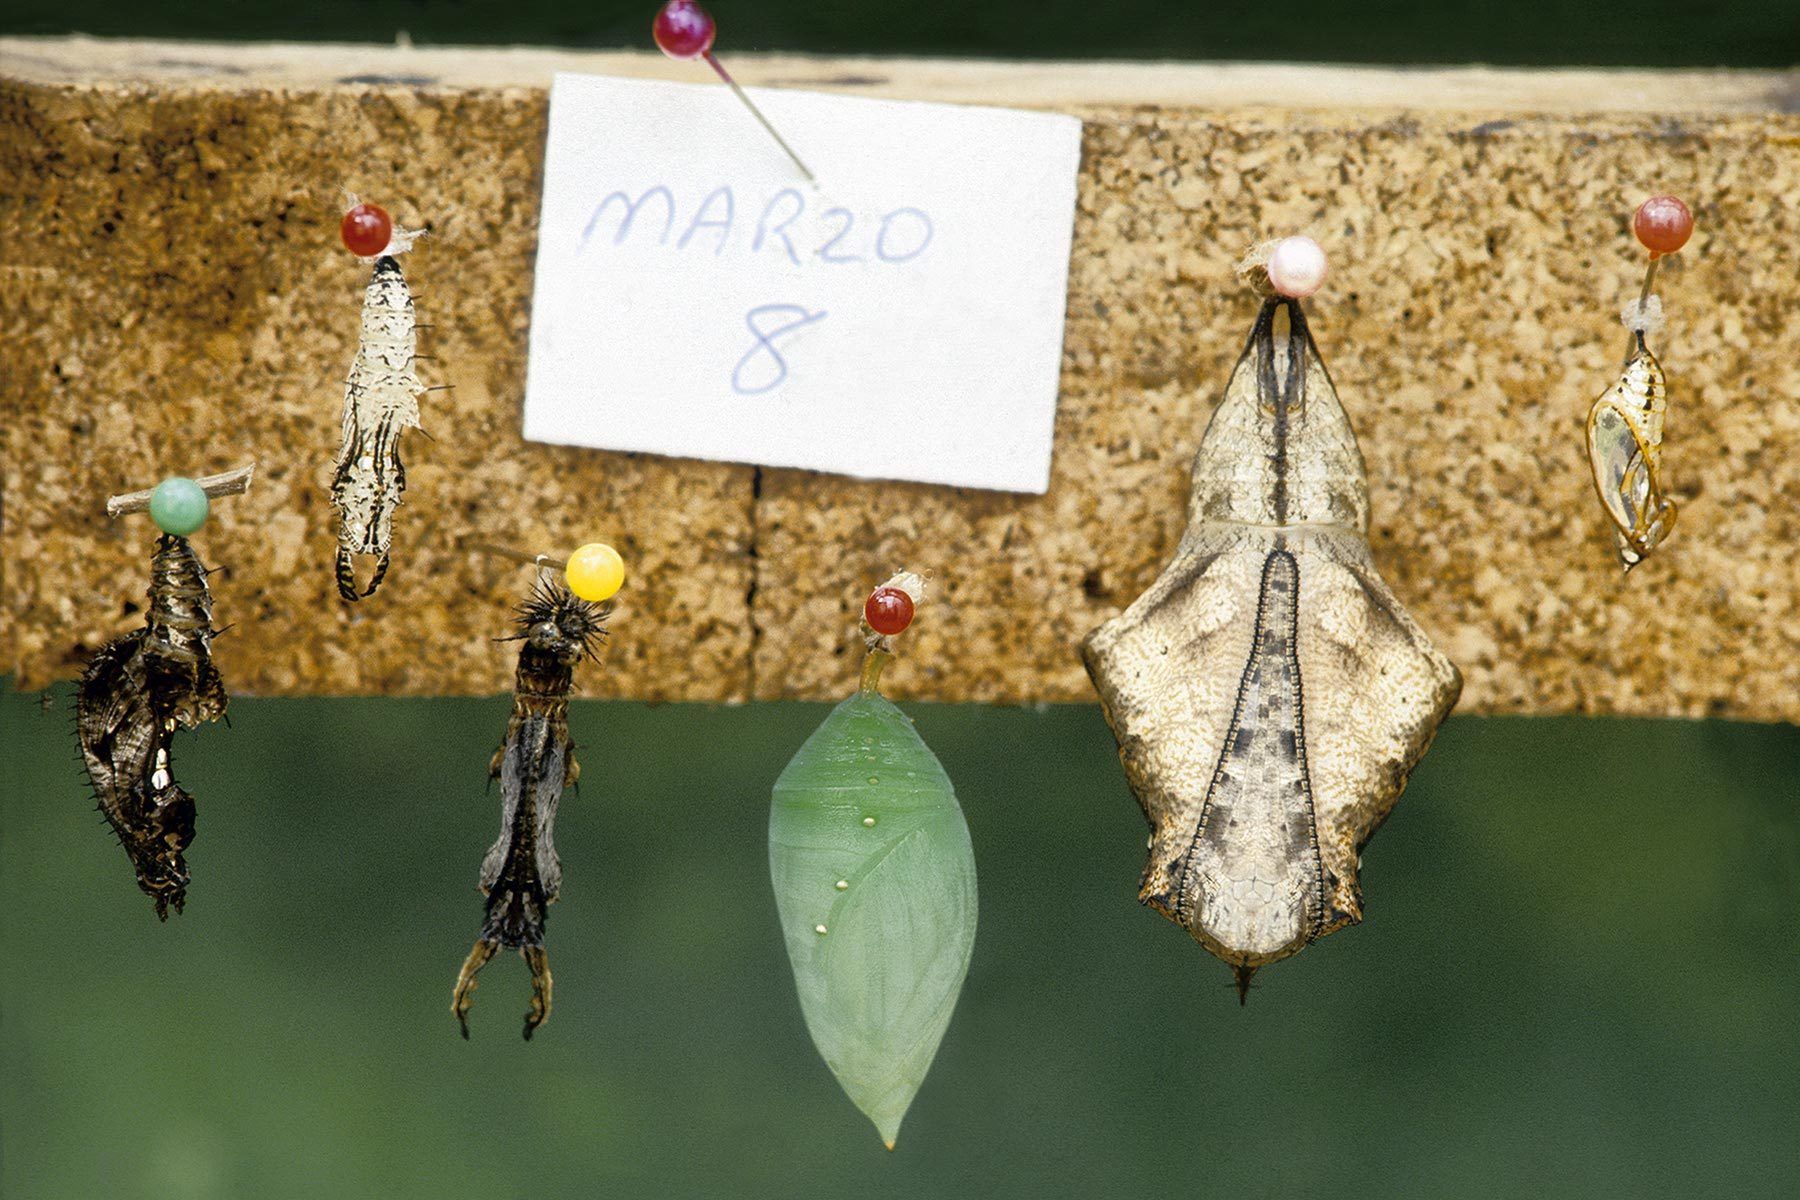 Tropical butterfly and moth pupa